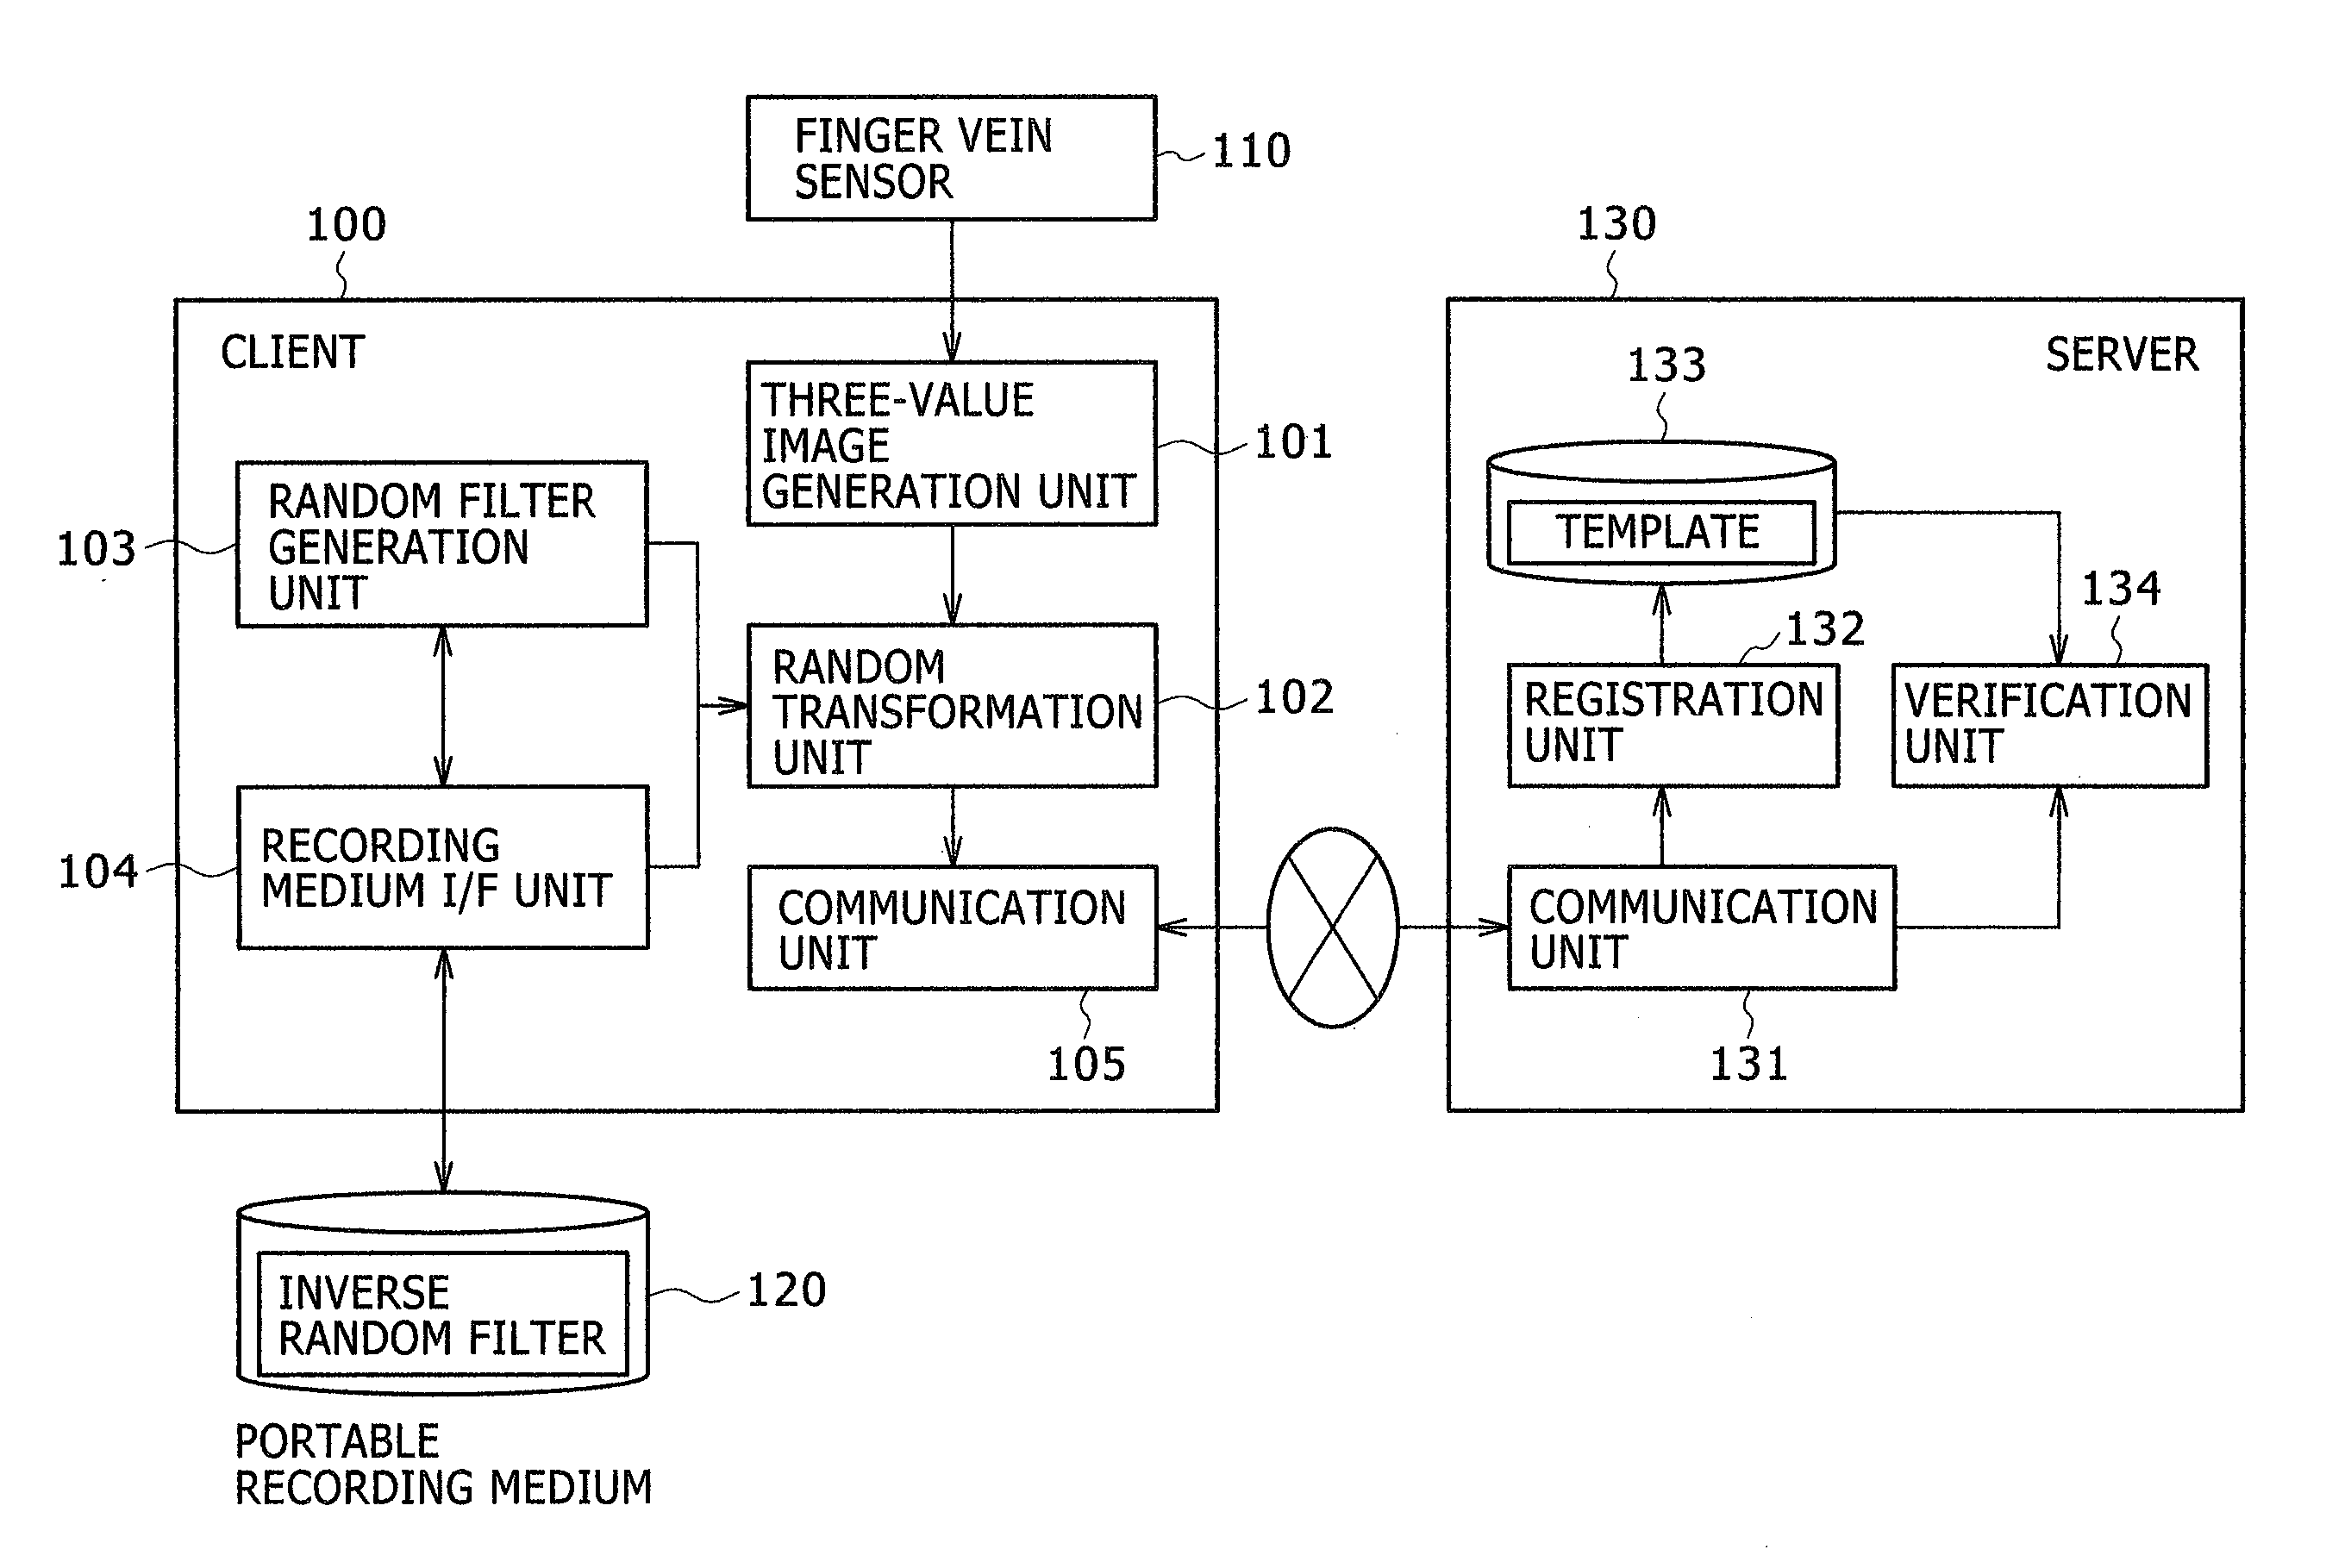 Method, System and Program for Authenticating a User by Biometric Information